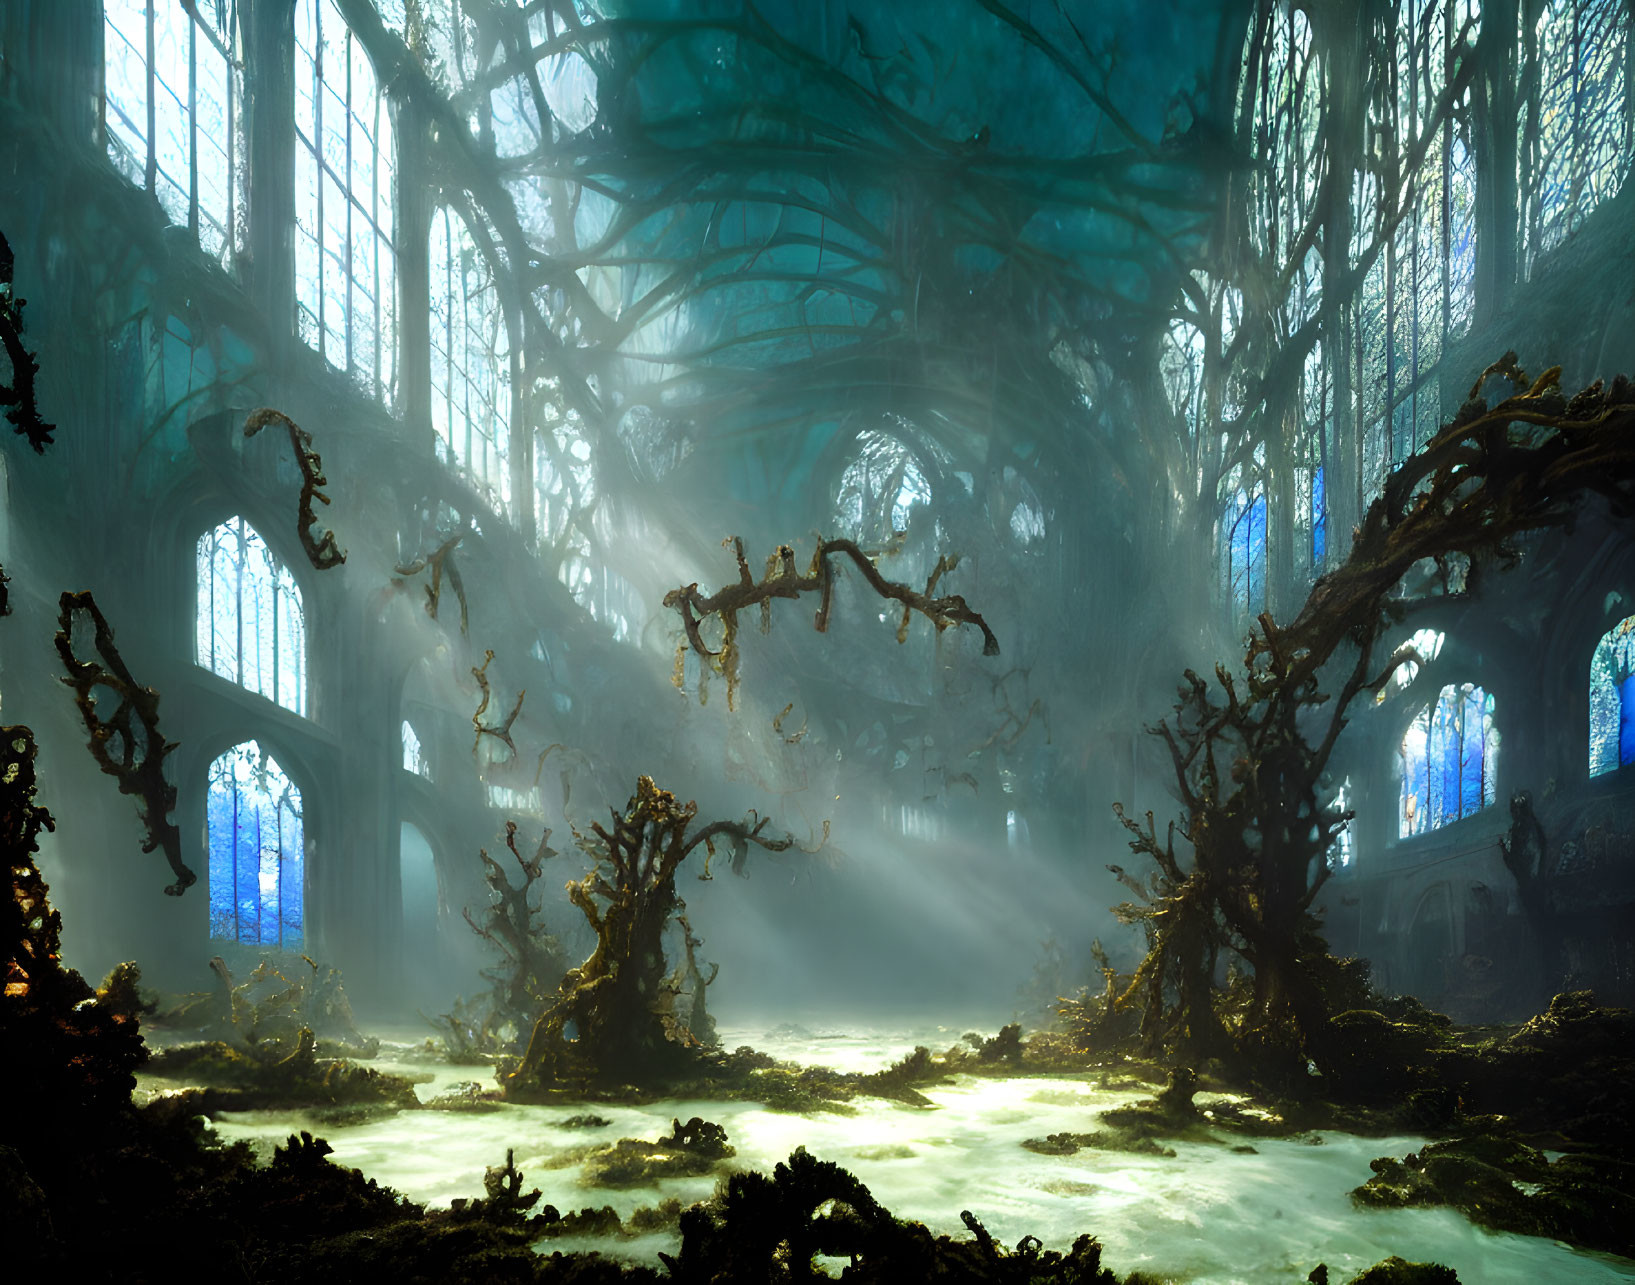 Ethereal forest meets gothic cathedral ruins in a misty scene